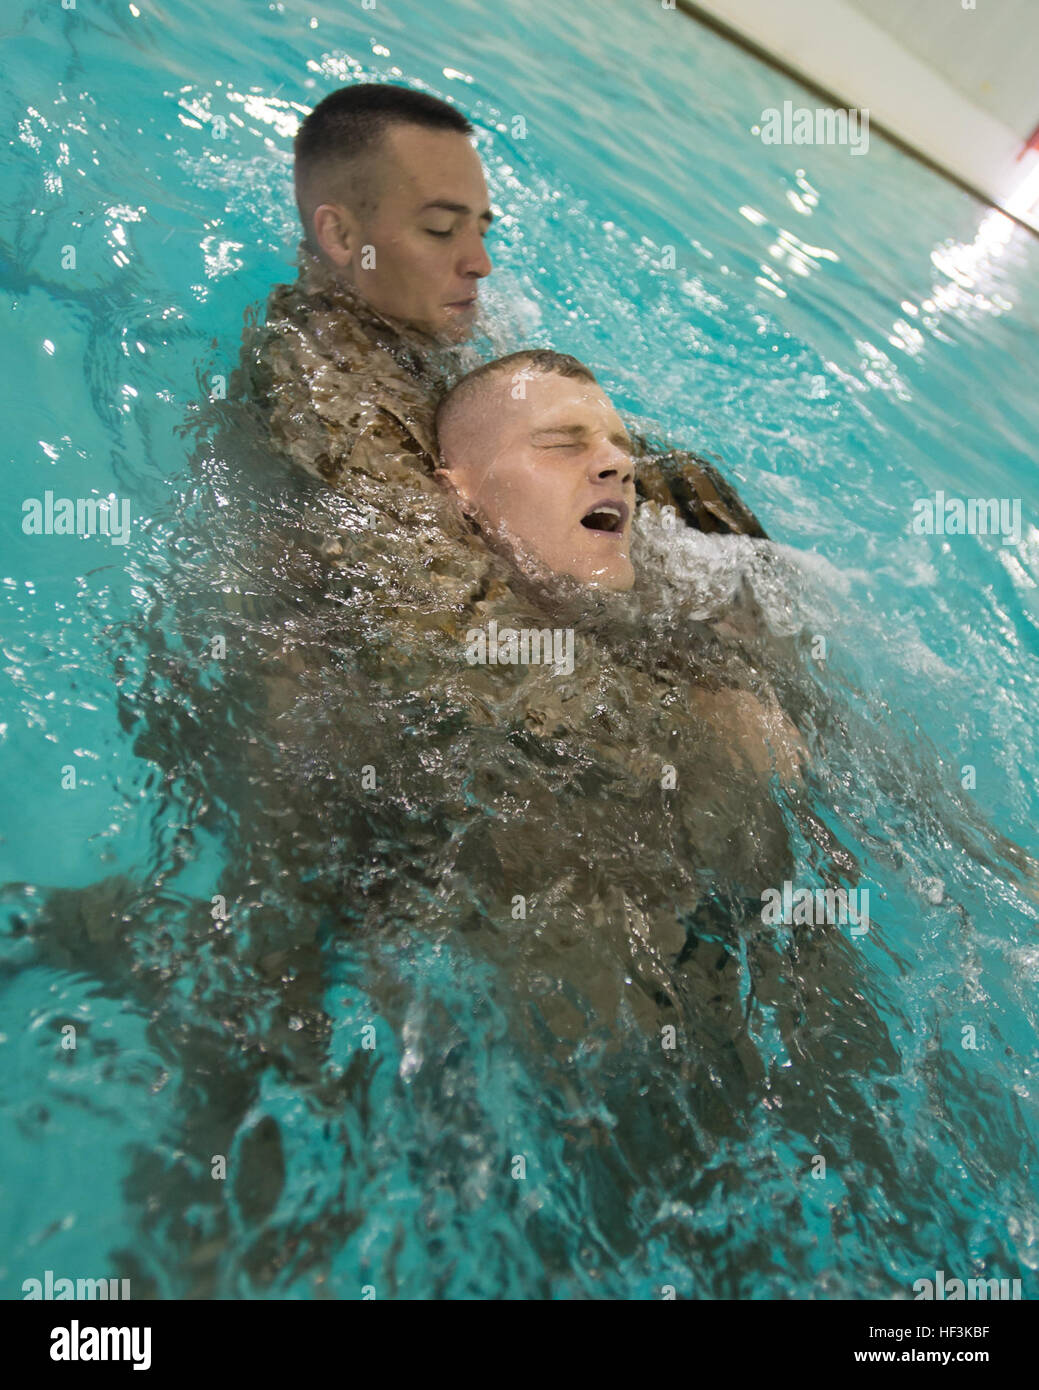 U.S. Marines with The Basic School simulate rescue techniques for the basic and intermediate swim qualification course at The Basic School, Marine Corps Base Quantico, Va., Sept. 10, 2015. The course teaches Marines water survival and tactical skills. (U.S. Marine Corps photo by Lance Cpl. Jacqueline A. Garcia/Released) The Basic School Golf Co Swim Qual 150910-M-PO745-450 Stock Photo